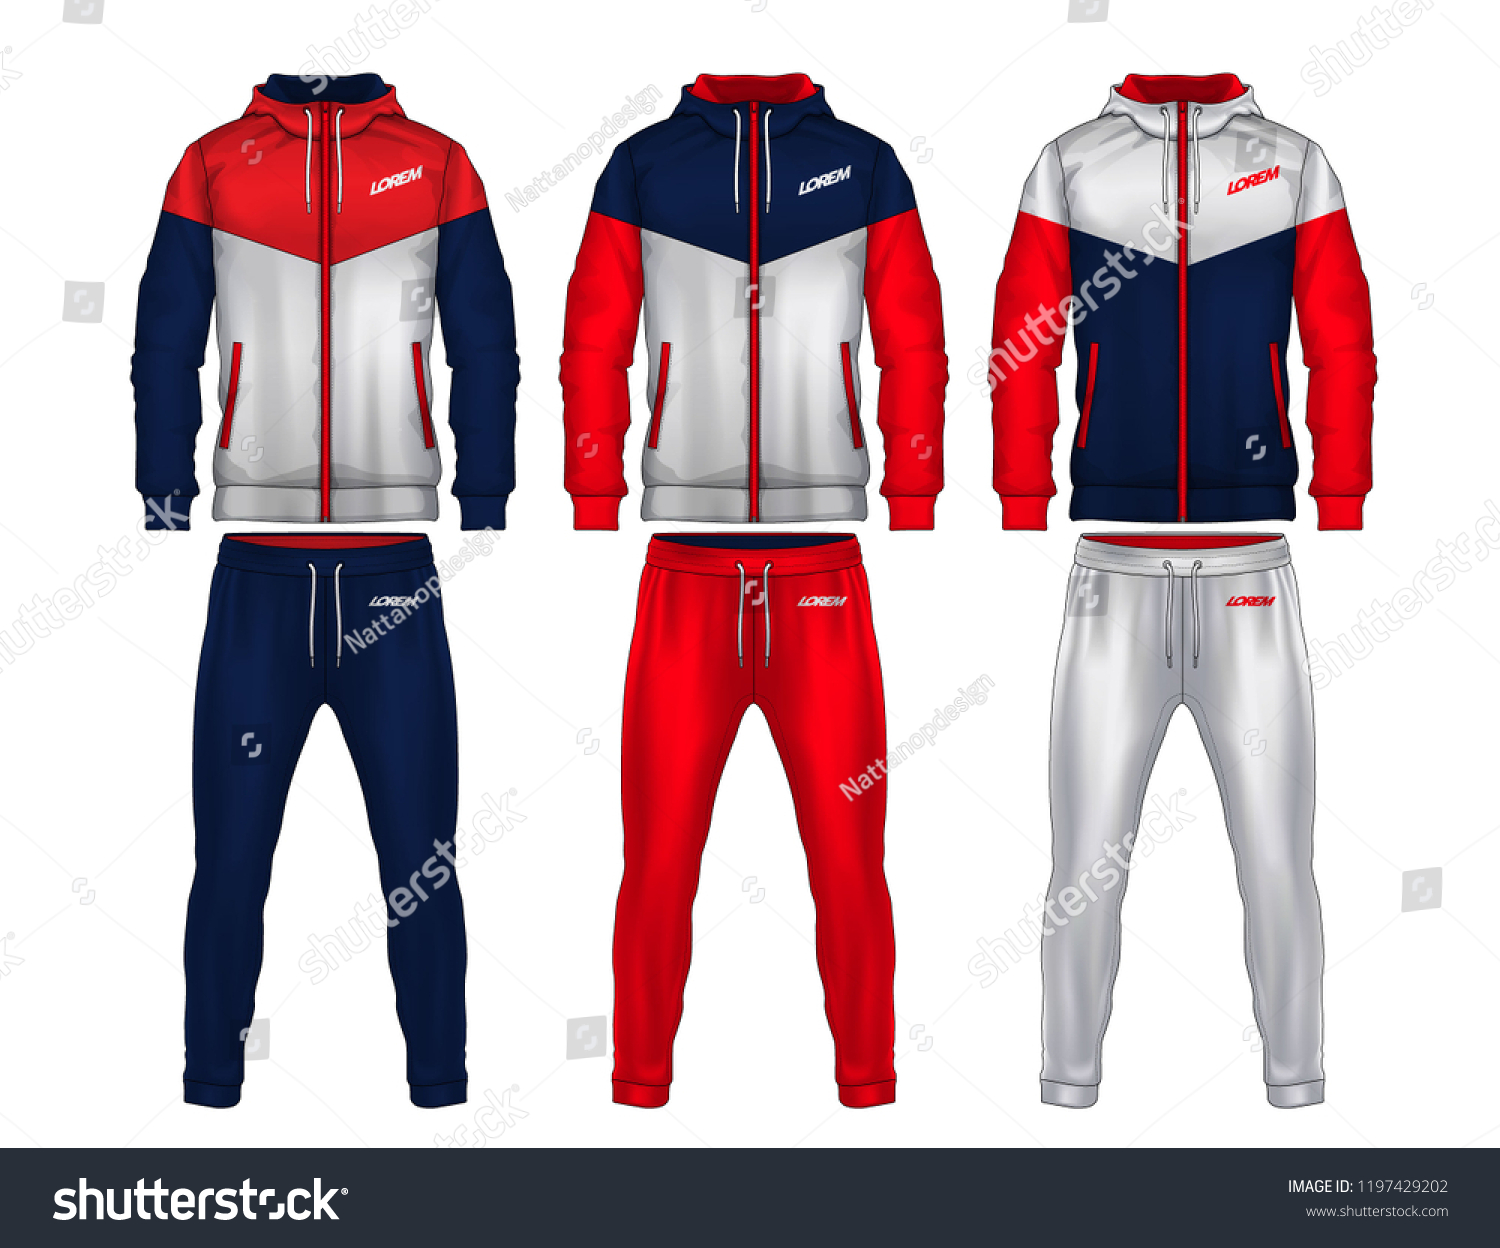 SVG of sport track suit design template,jacket and trousers vector illustration, svg